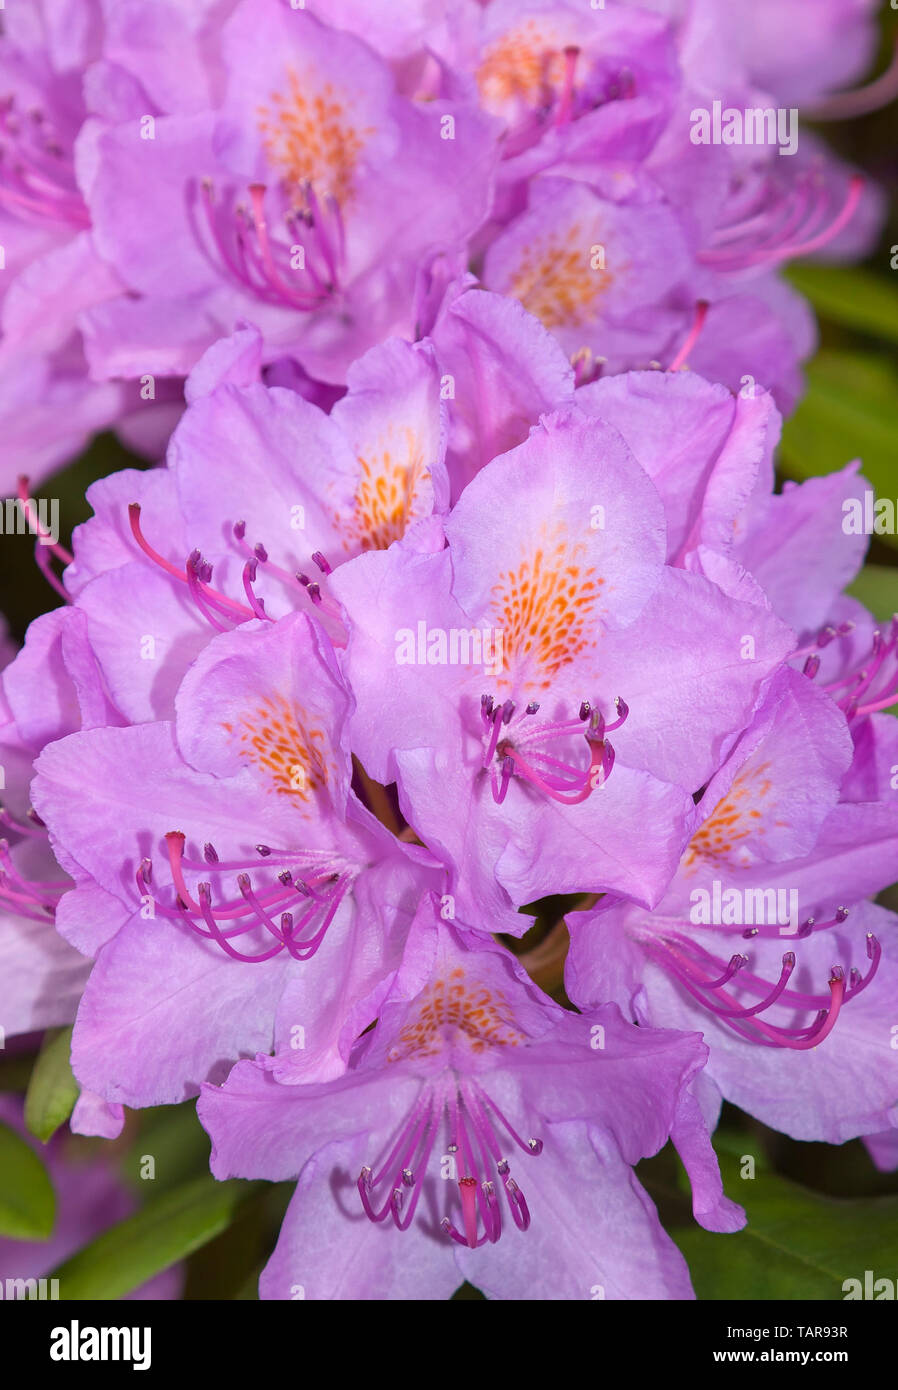 Flowers of a rhododendron Stock Photo